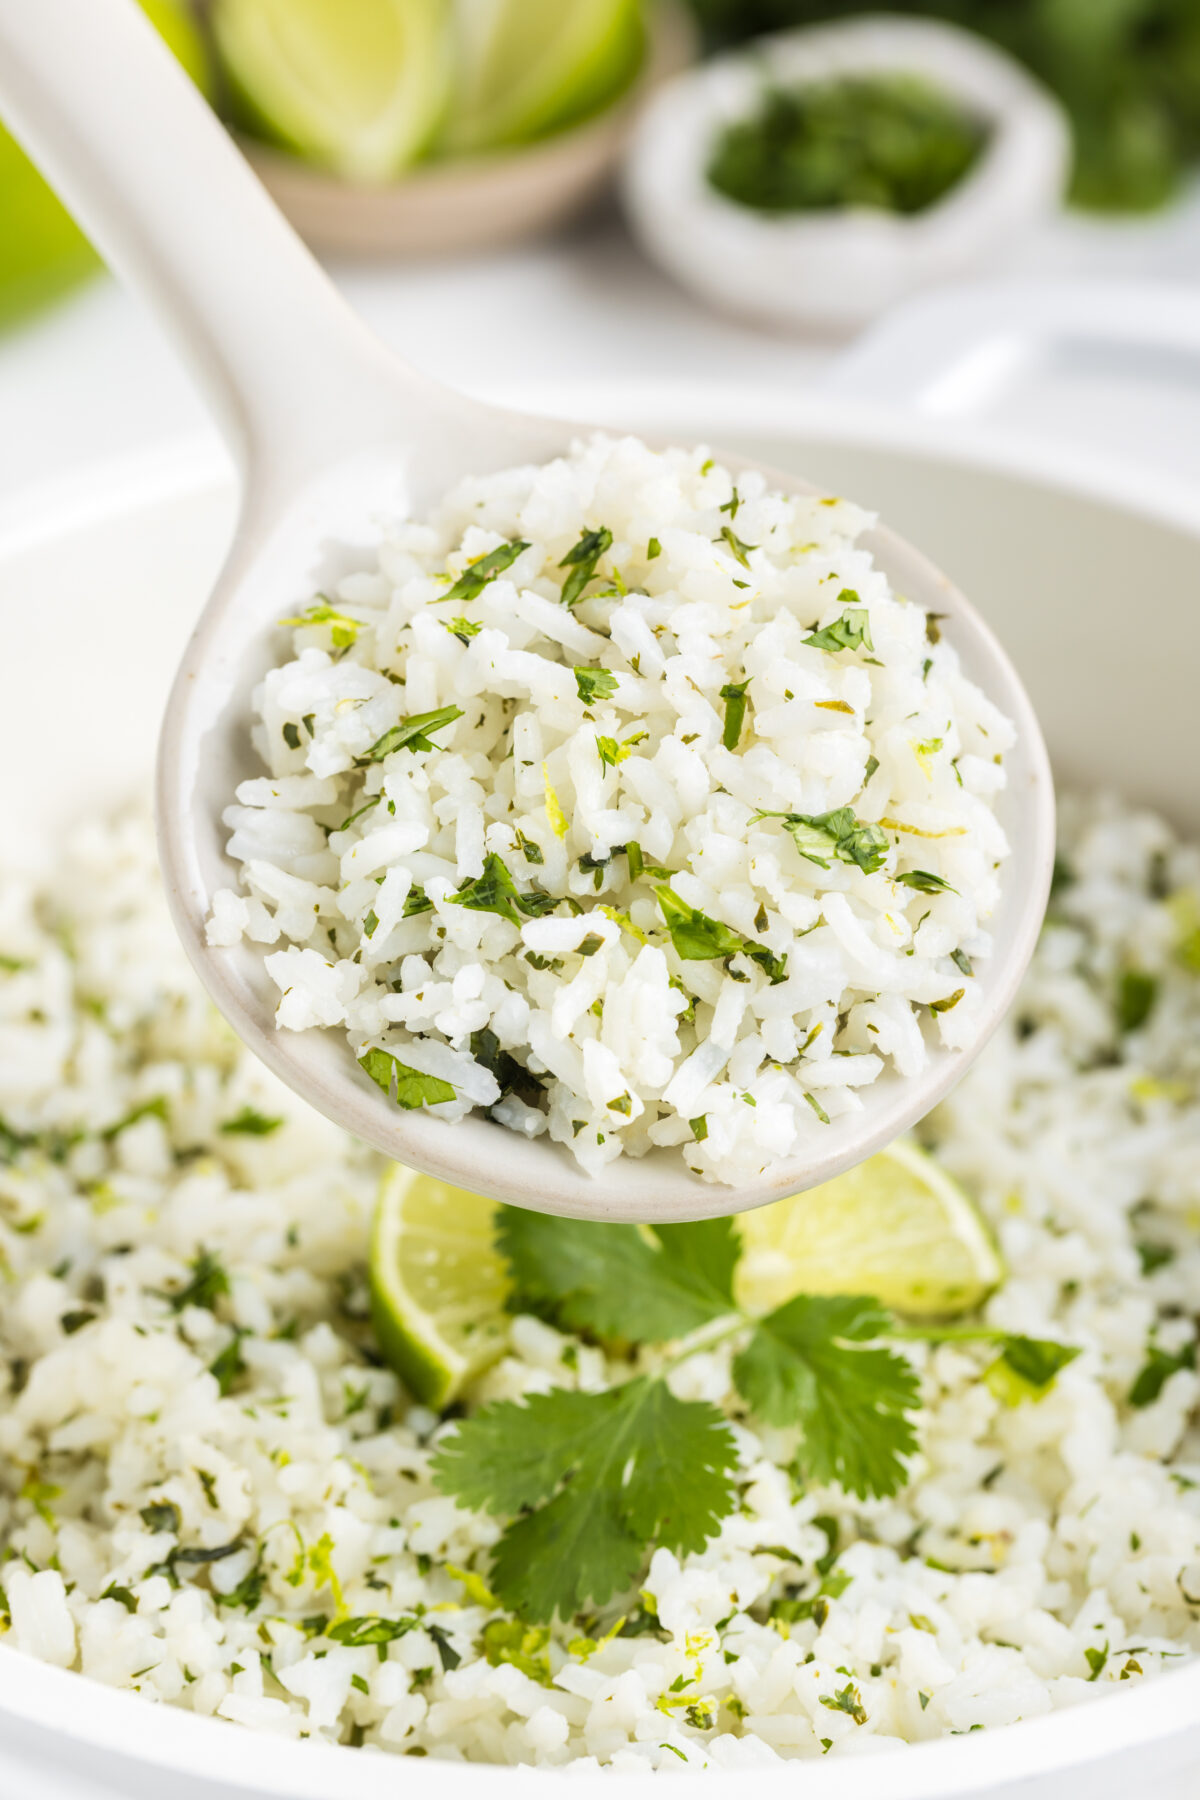 Whip up the perfect side dish with our Cilantro Lime Rice recipe. Packed with fresh herbs and zesty lime, this easy rice dish is irresistible.